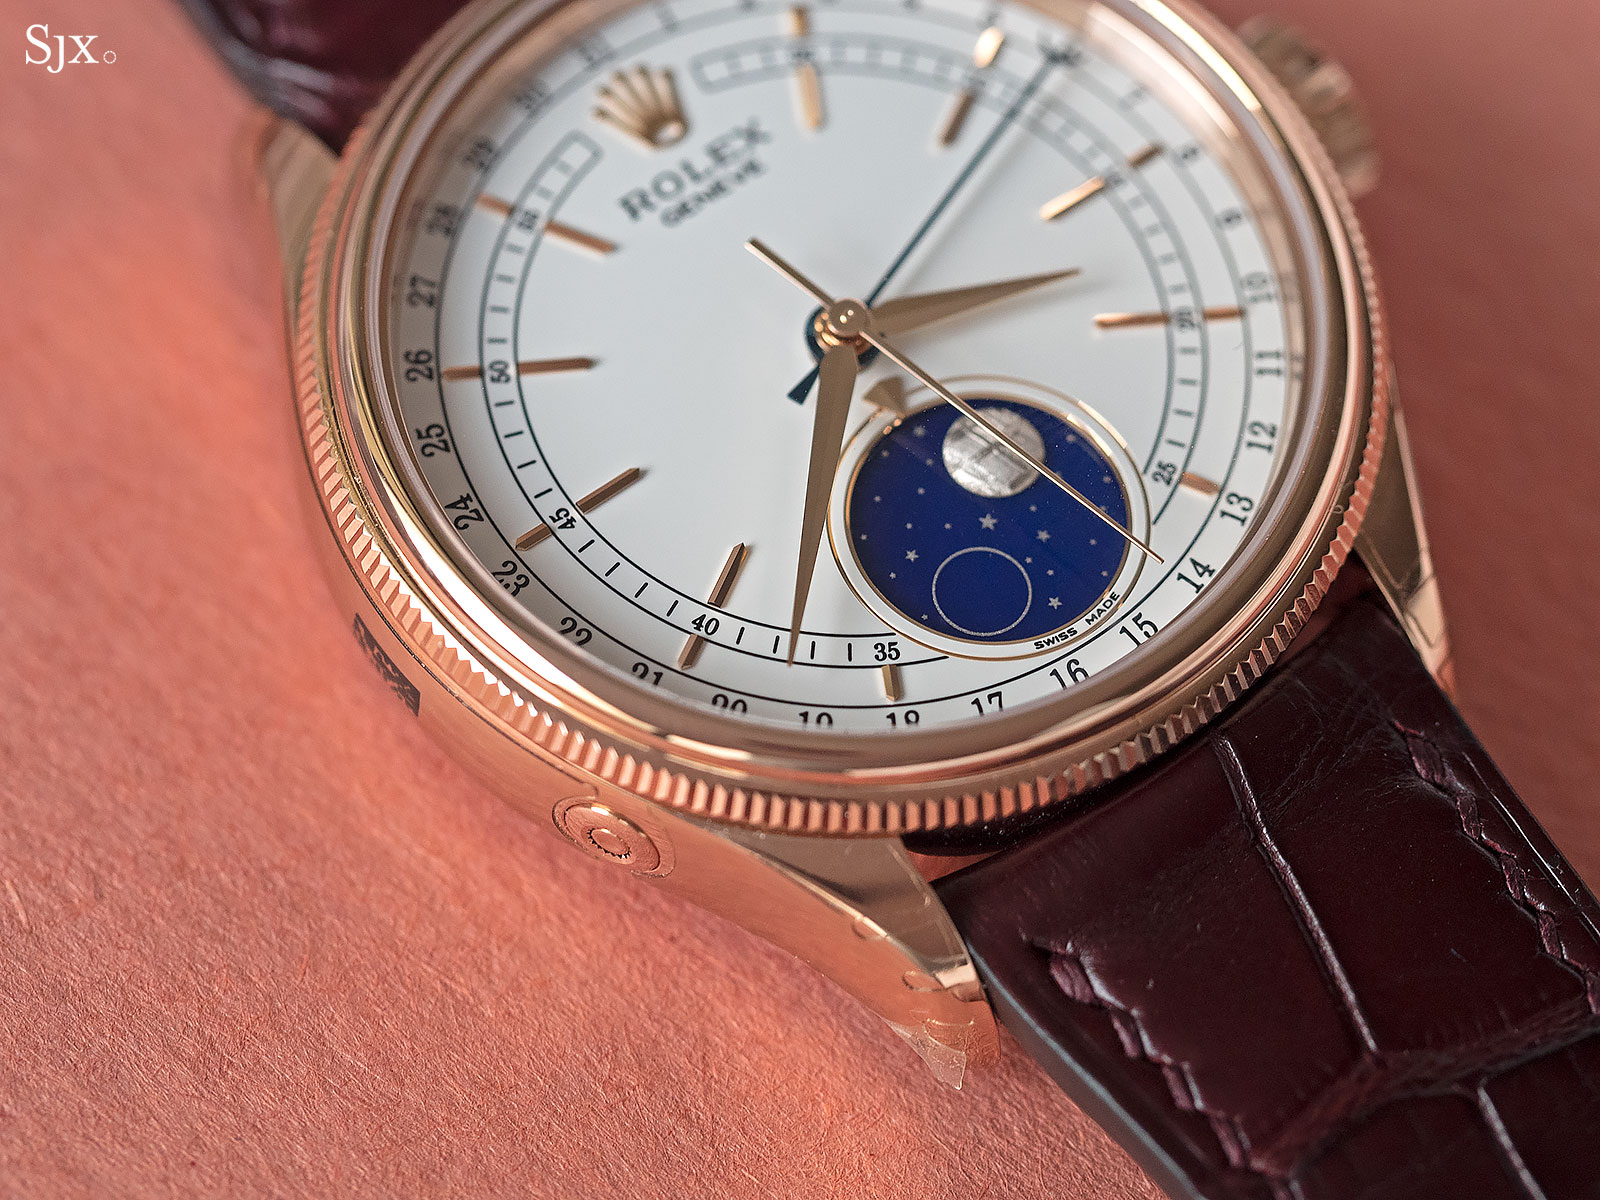 Rolex Cellini Moonphase 50535 review 9